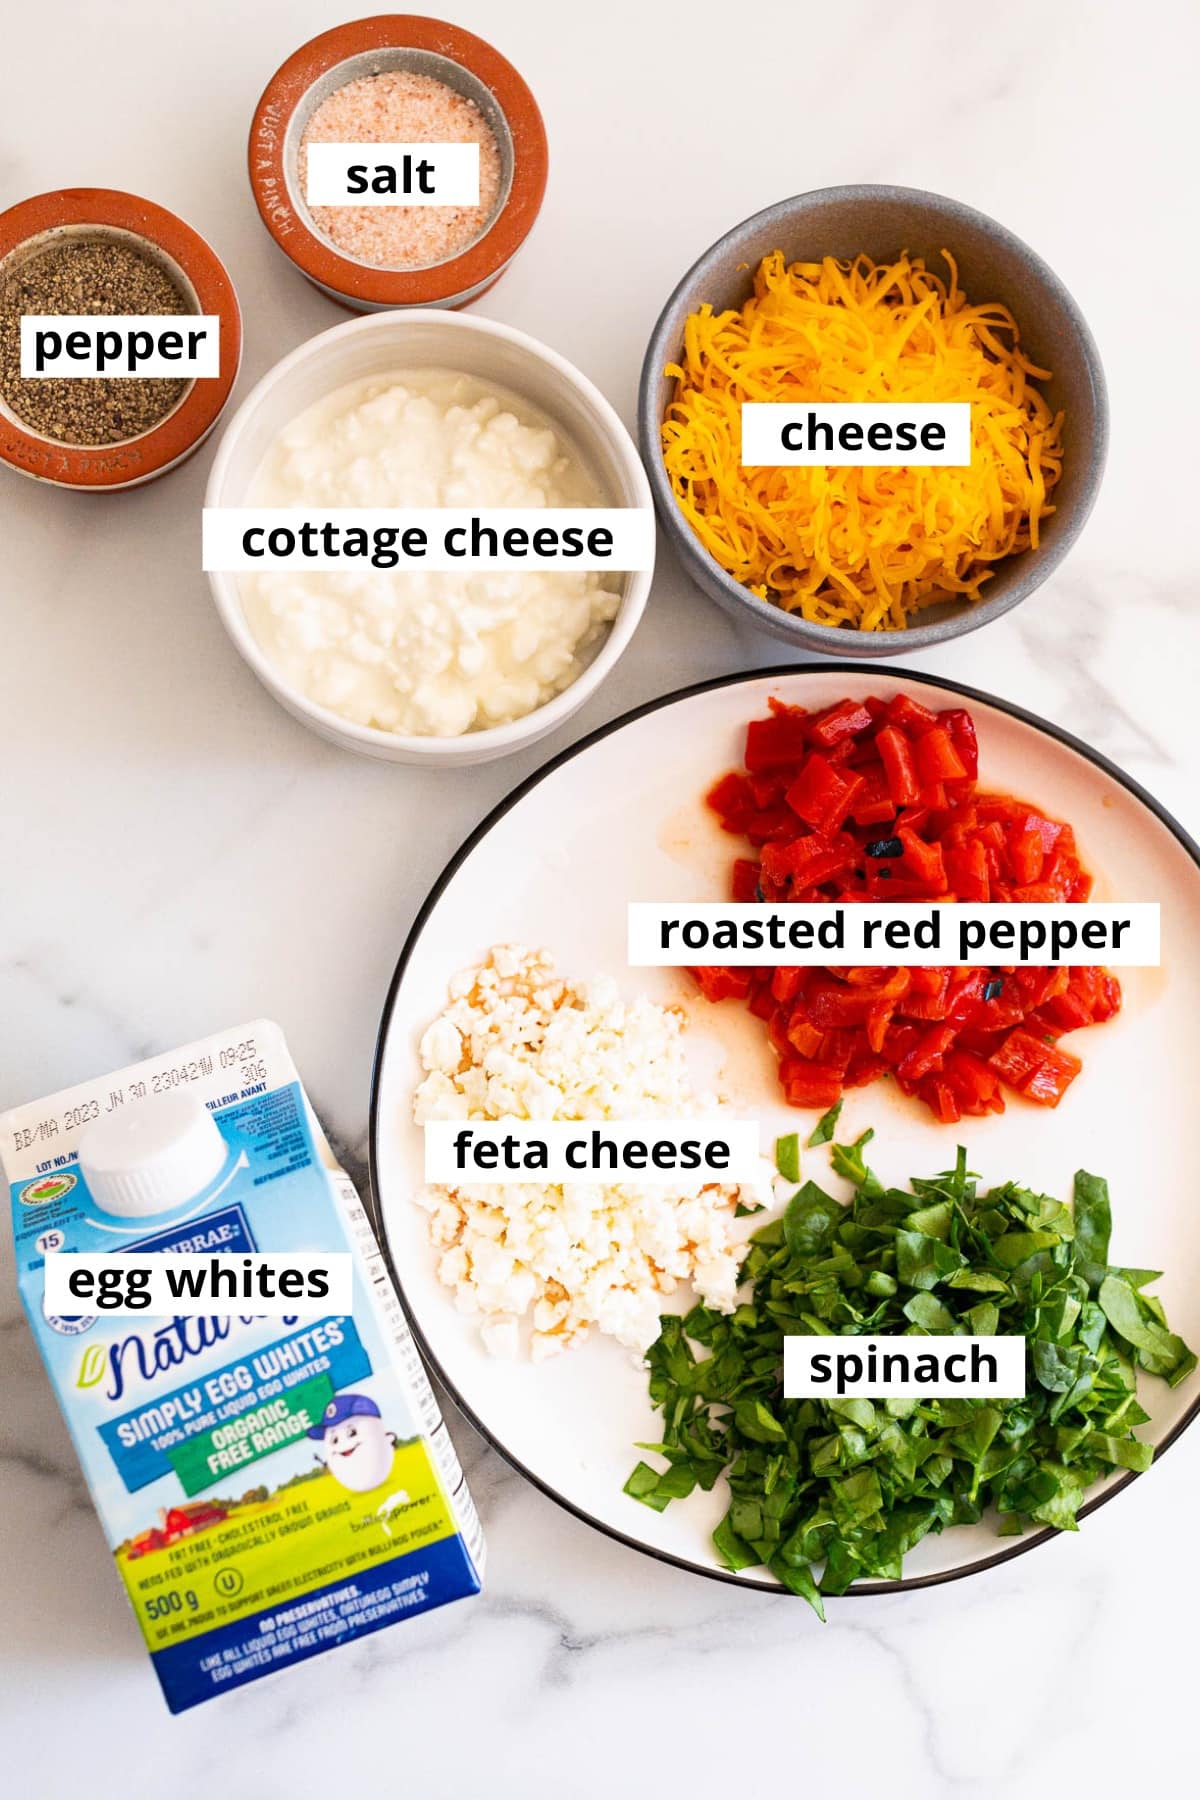 Cottage cheese, cheddar cheese, salt, pepper, roasted red pepper, feta cheese, spinach and egg whites.